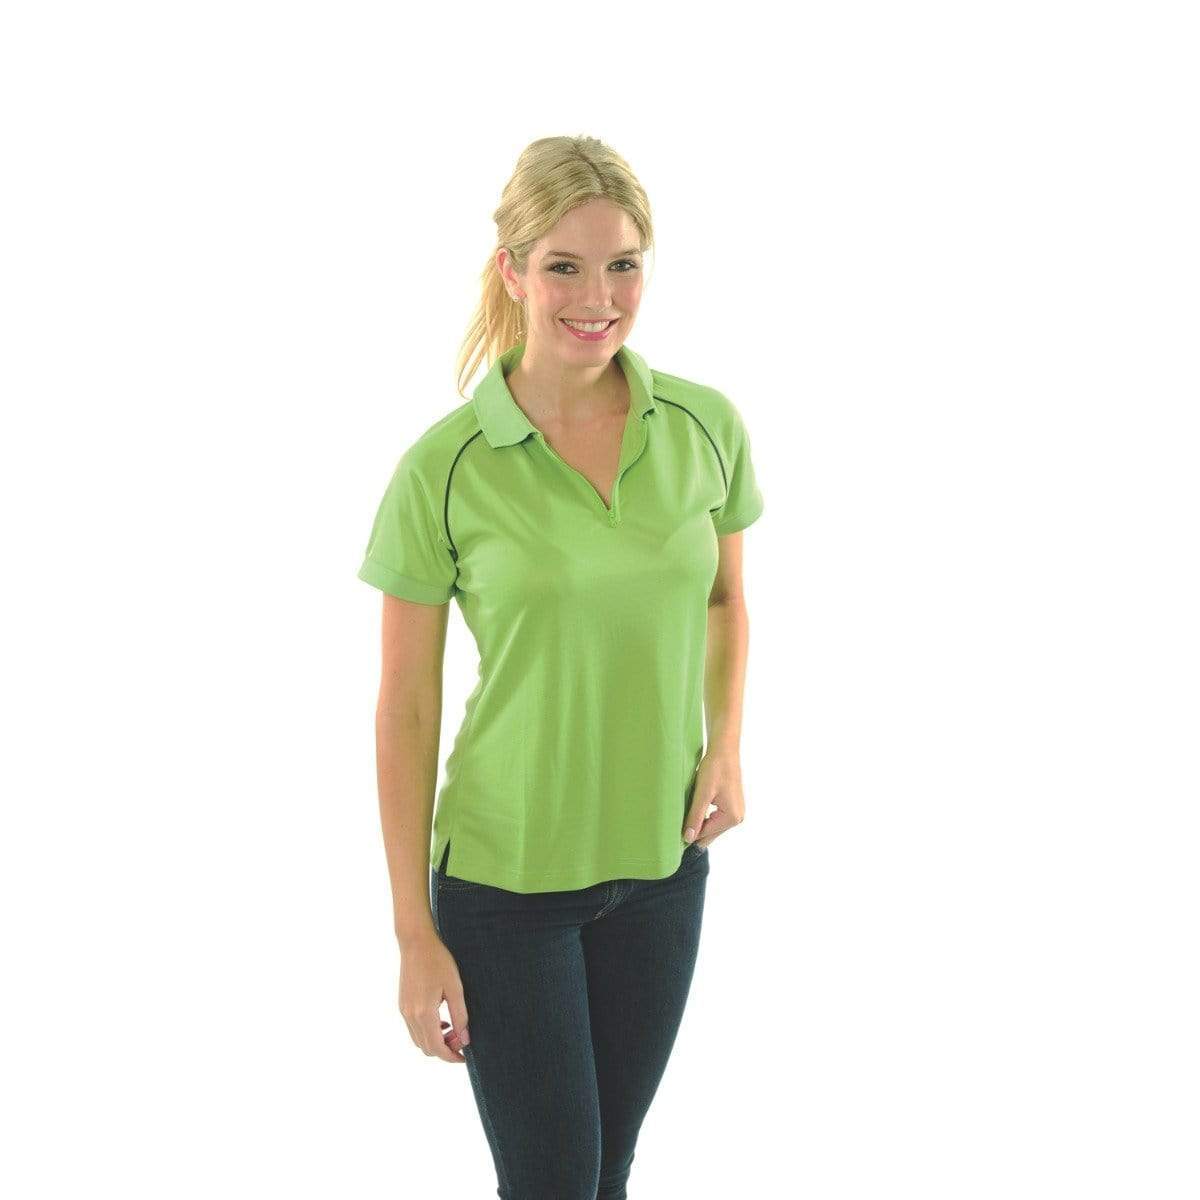 Dnc Workwear Women’s Cool-breathe Rome Polo - 5268 Casual Wear DNC Workwear Cool Lime/Navy 24 